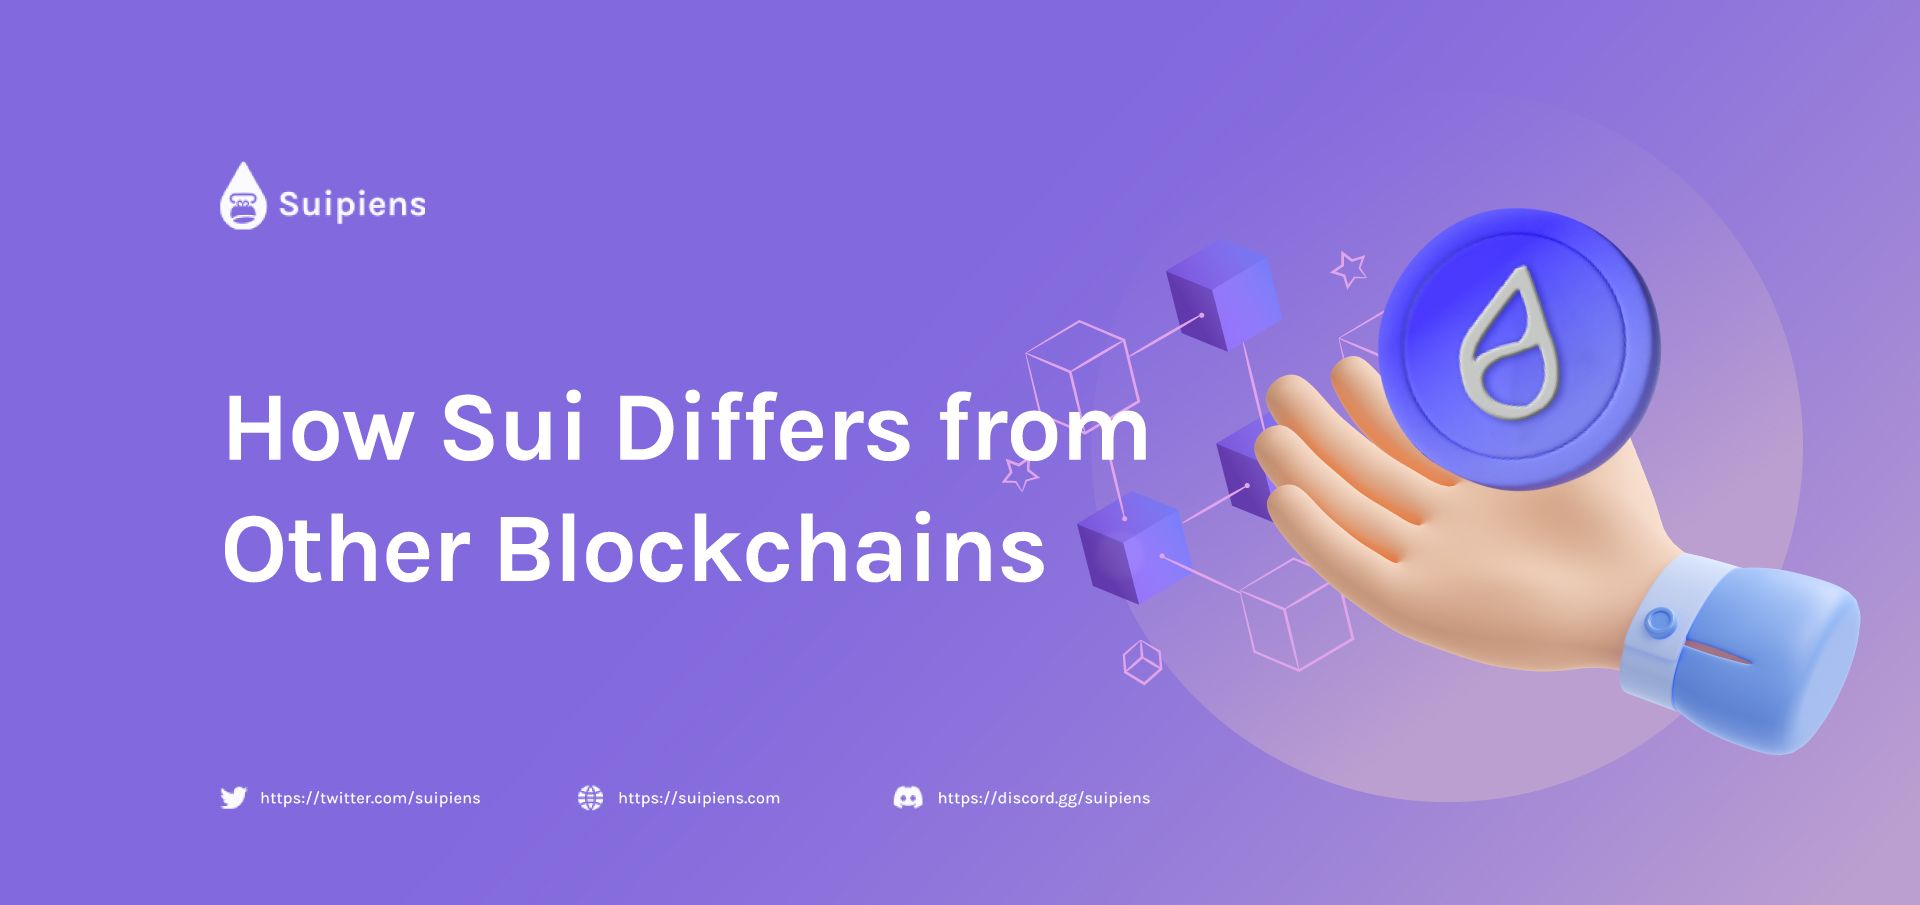 How Sui Differs From Other Blockchains